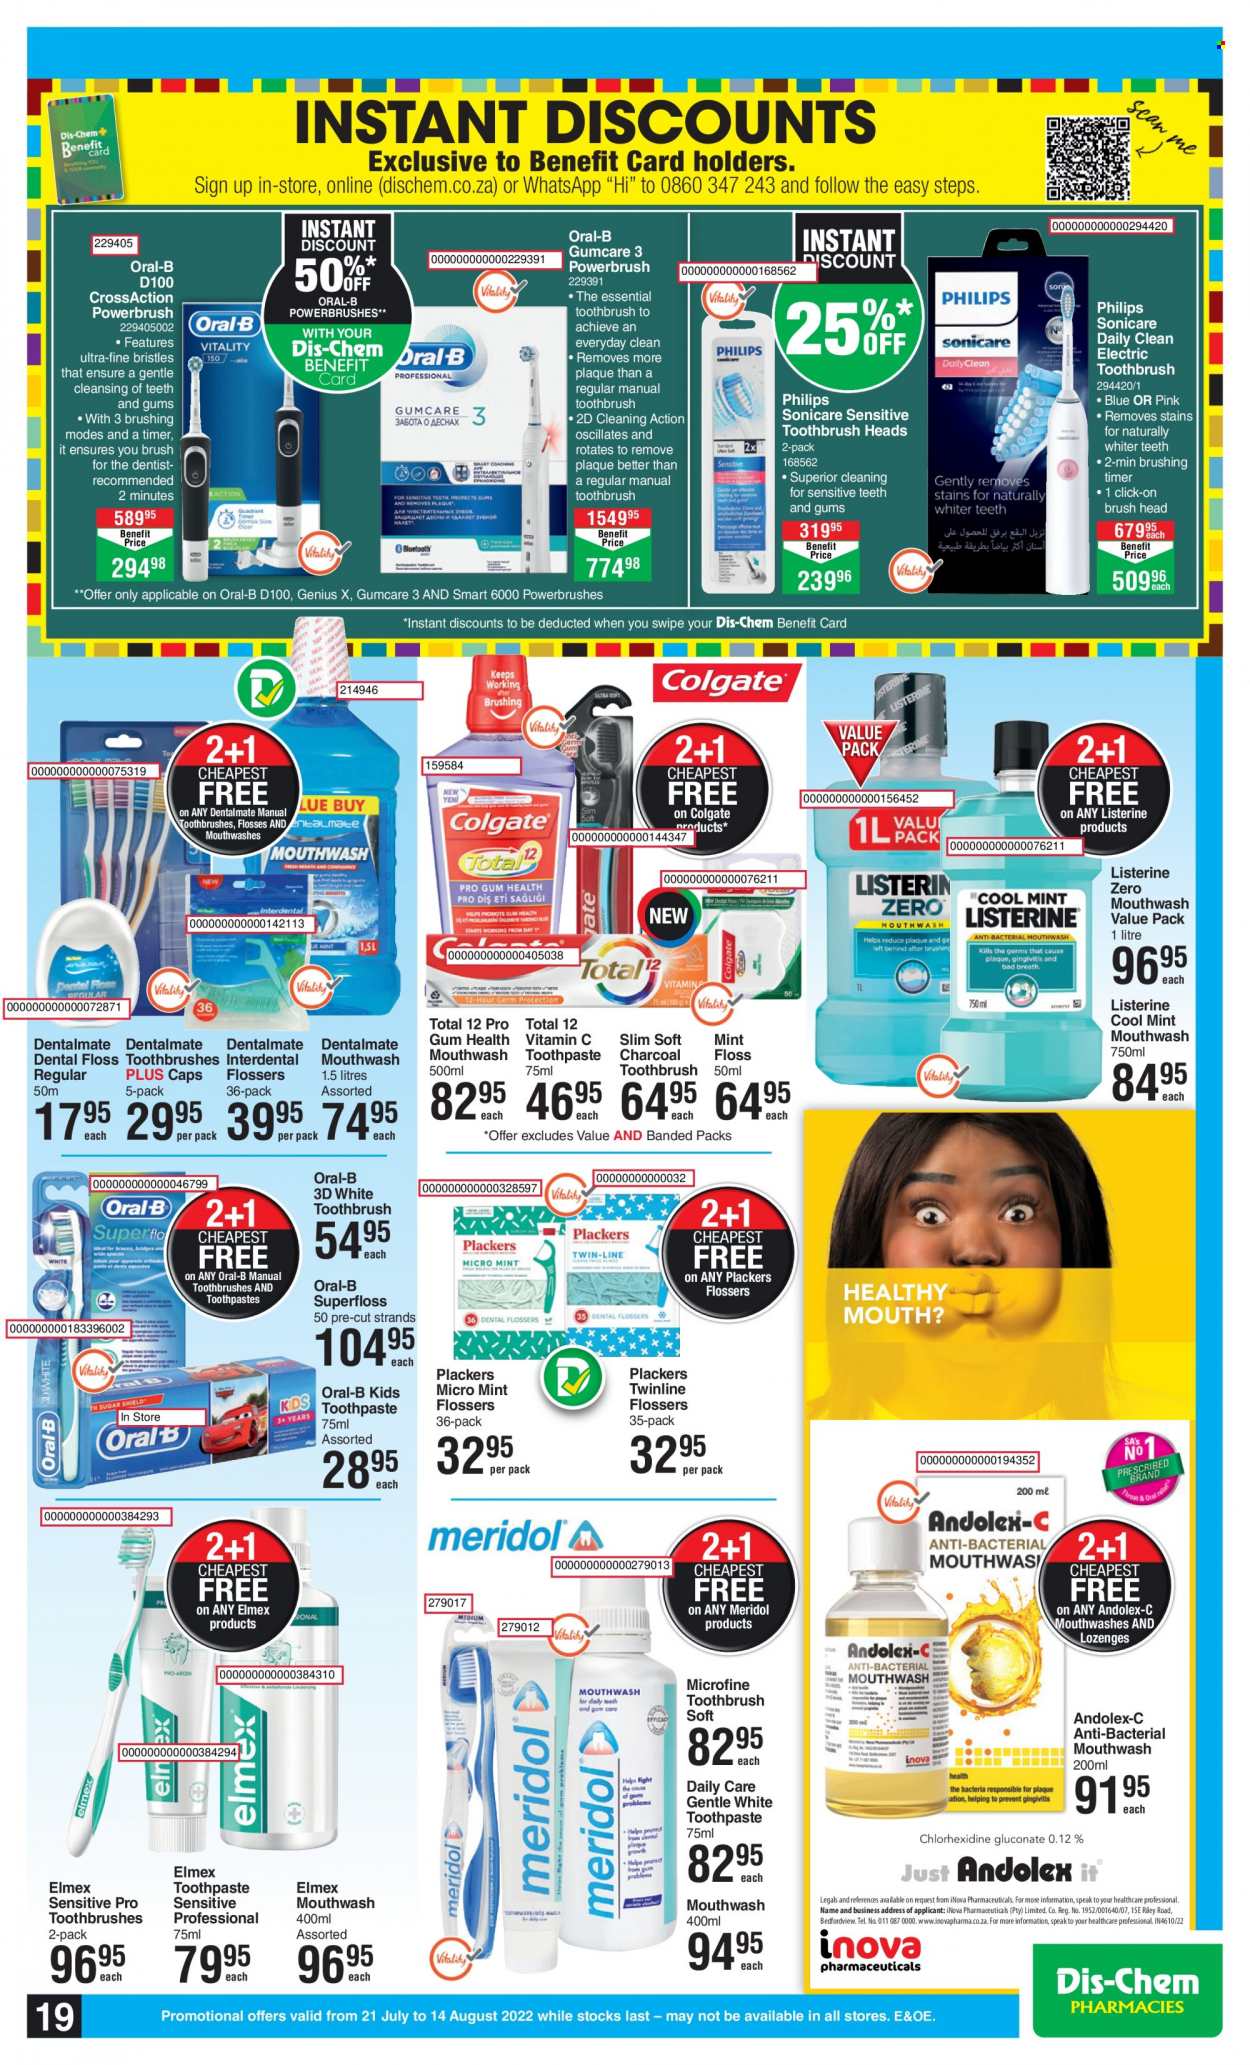 thumbnail - Dis-Chem catalogue  - 21/07/2022 - 14/08/2022 - Sales products - Philips, Colgate, Listerine, toothbrush, Oral-B, toothpaste, mouthwash, charcoal toothbrush, electric toothbrush, Sonicare, vitamin c, Andolex. Page 19.